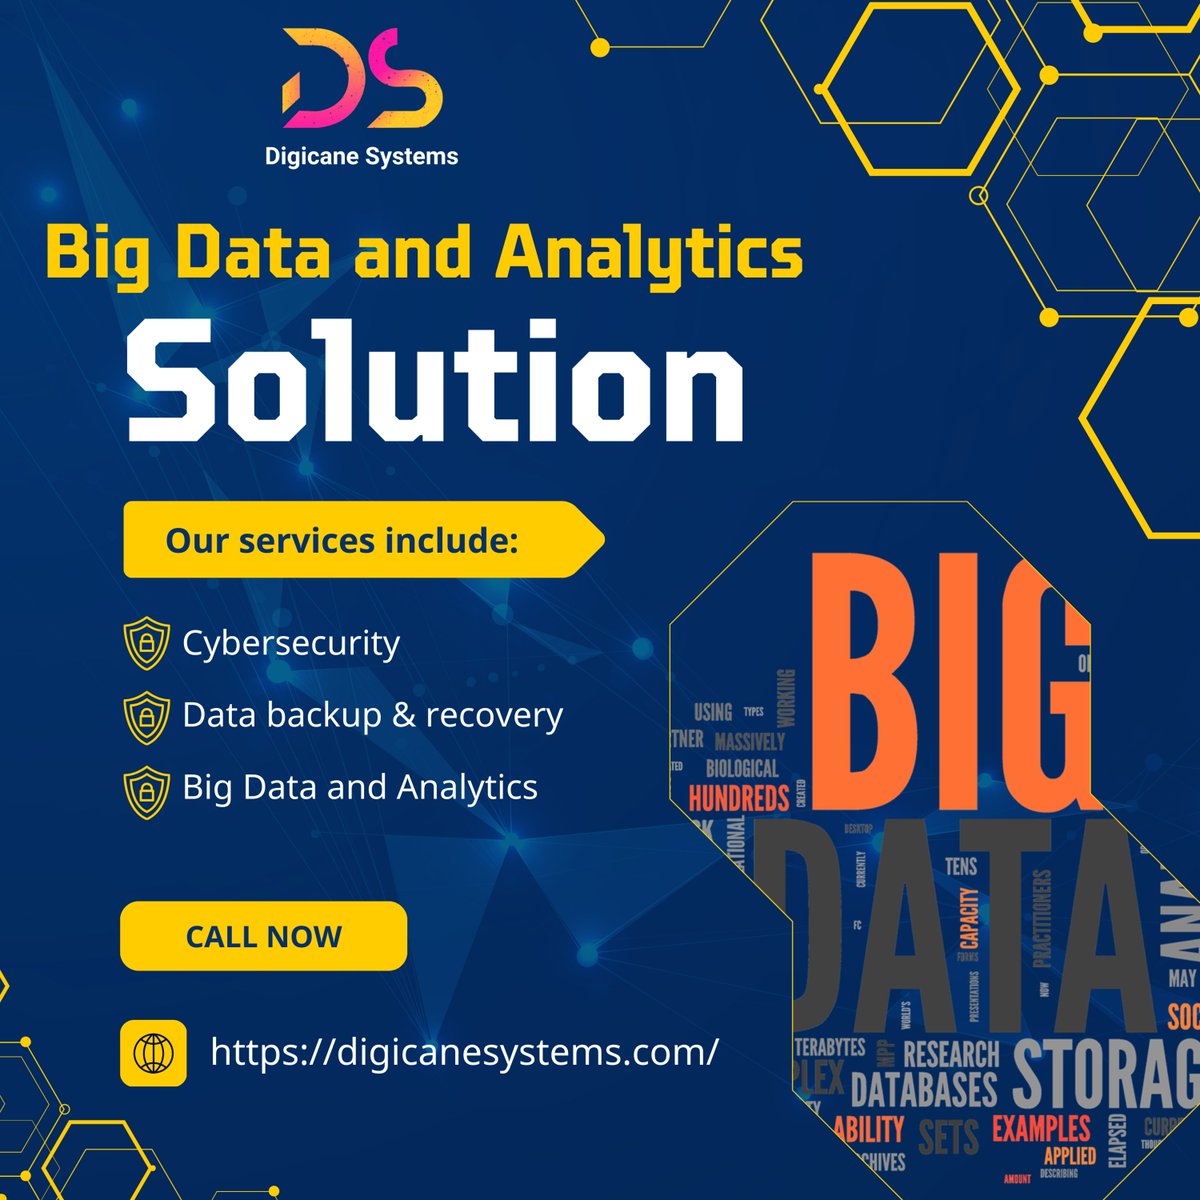 We understand the importance of data in today's competitive world. We provide complete Big Data and Analytics services to help companies gain access to valuable insights and propel strategic growth.

#BigData #Analytics #DataStrategy #DigicaneSystems #DataDrivenDecisionMaking